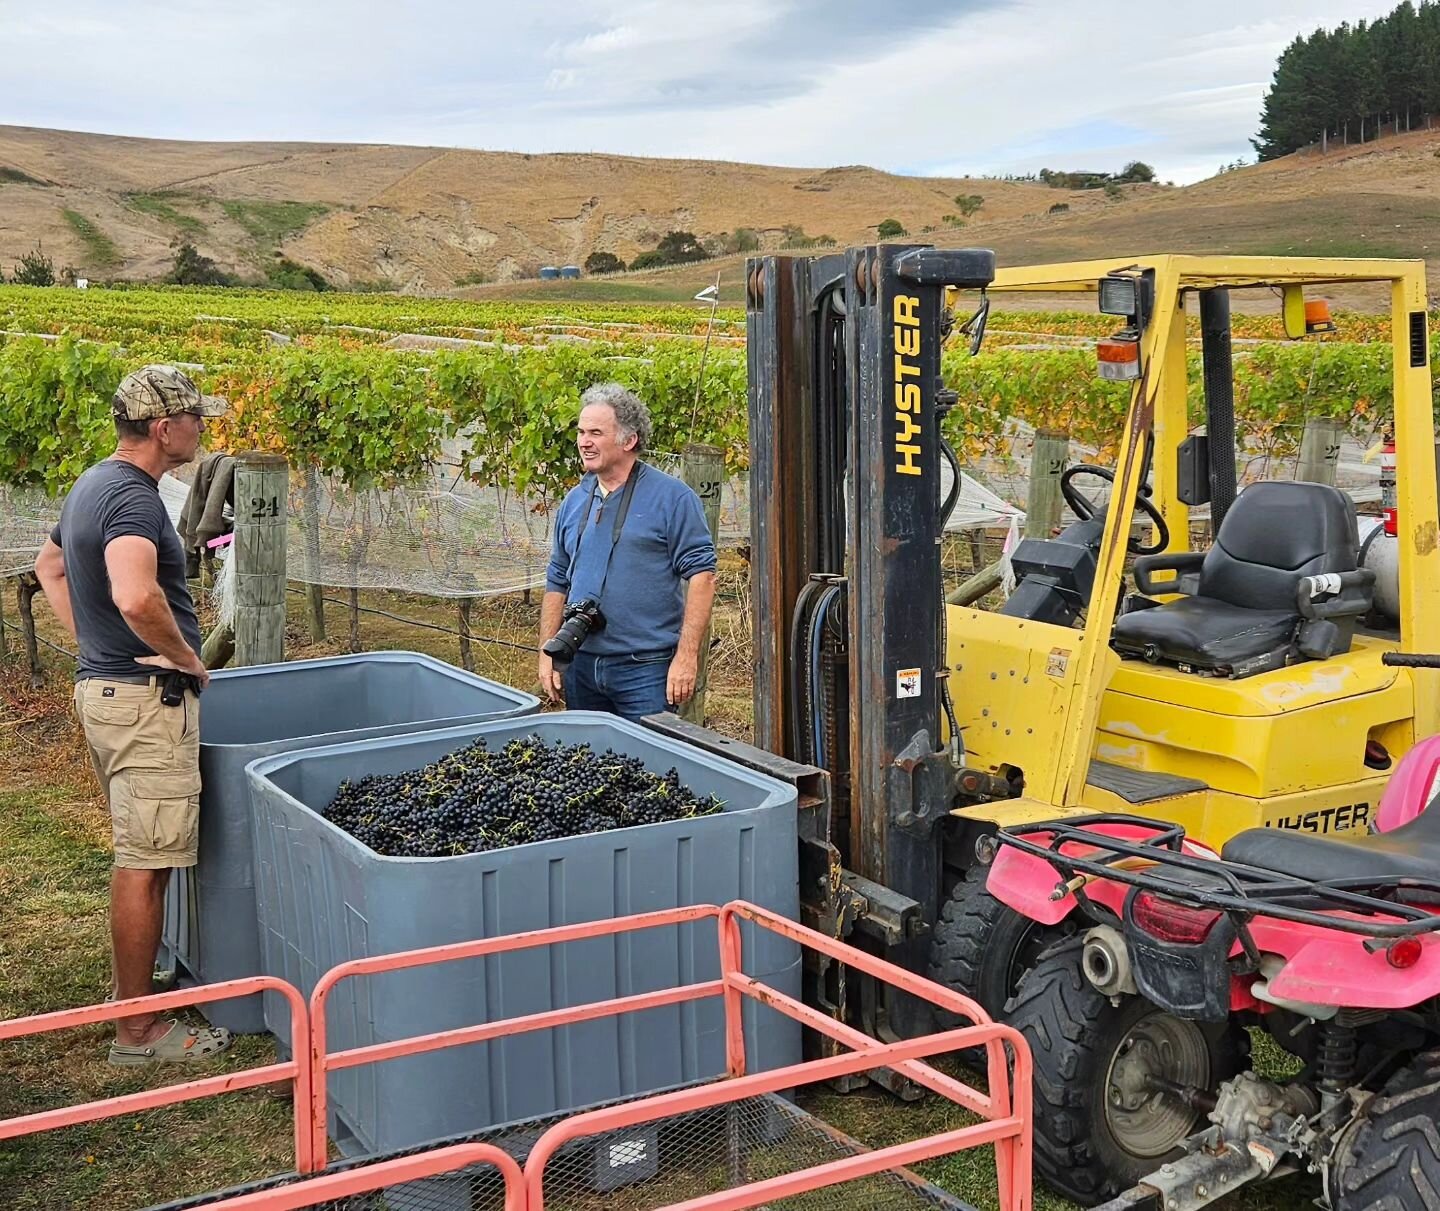 It's all go! Chit chat in the vines. 
Picking 2024 'Home Block' Syrah.
@rich.brim 

#harvest #syrah #easthope #photography #photo #busy #hawkesbaywine #nzv24 #hawkesbaynz #hawkesbaywine #hbwine #wine #finewine #picking #homeblock #home